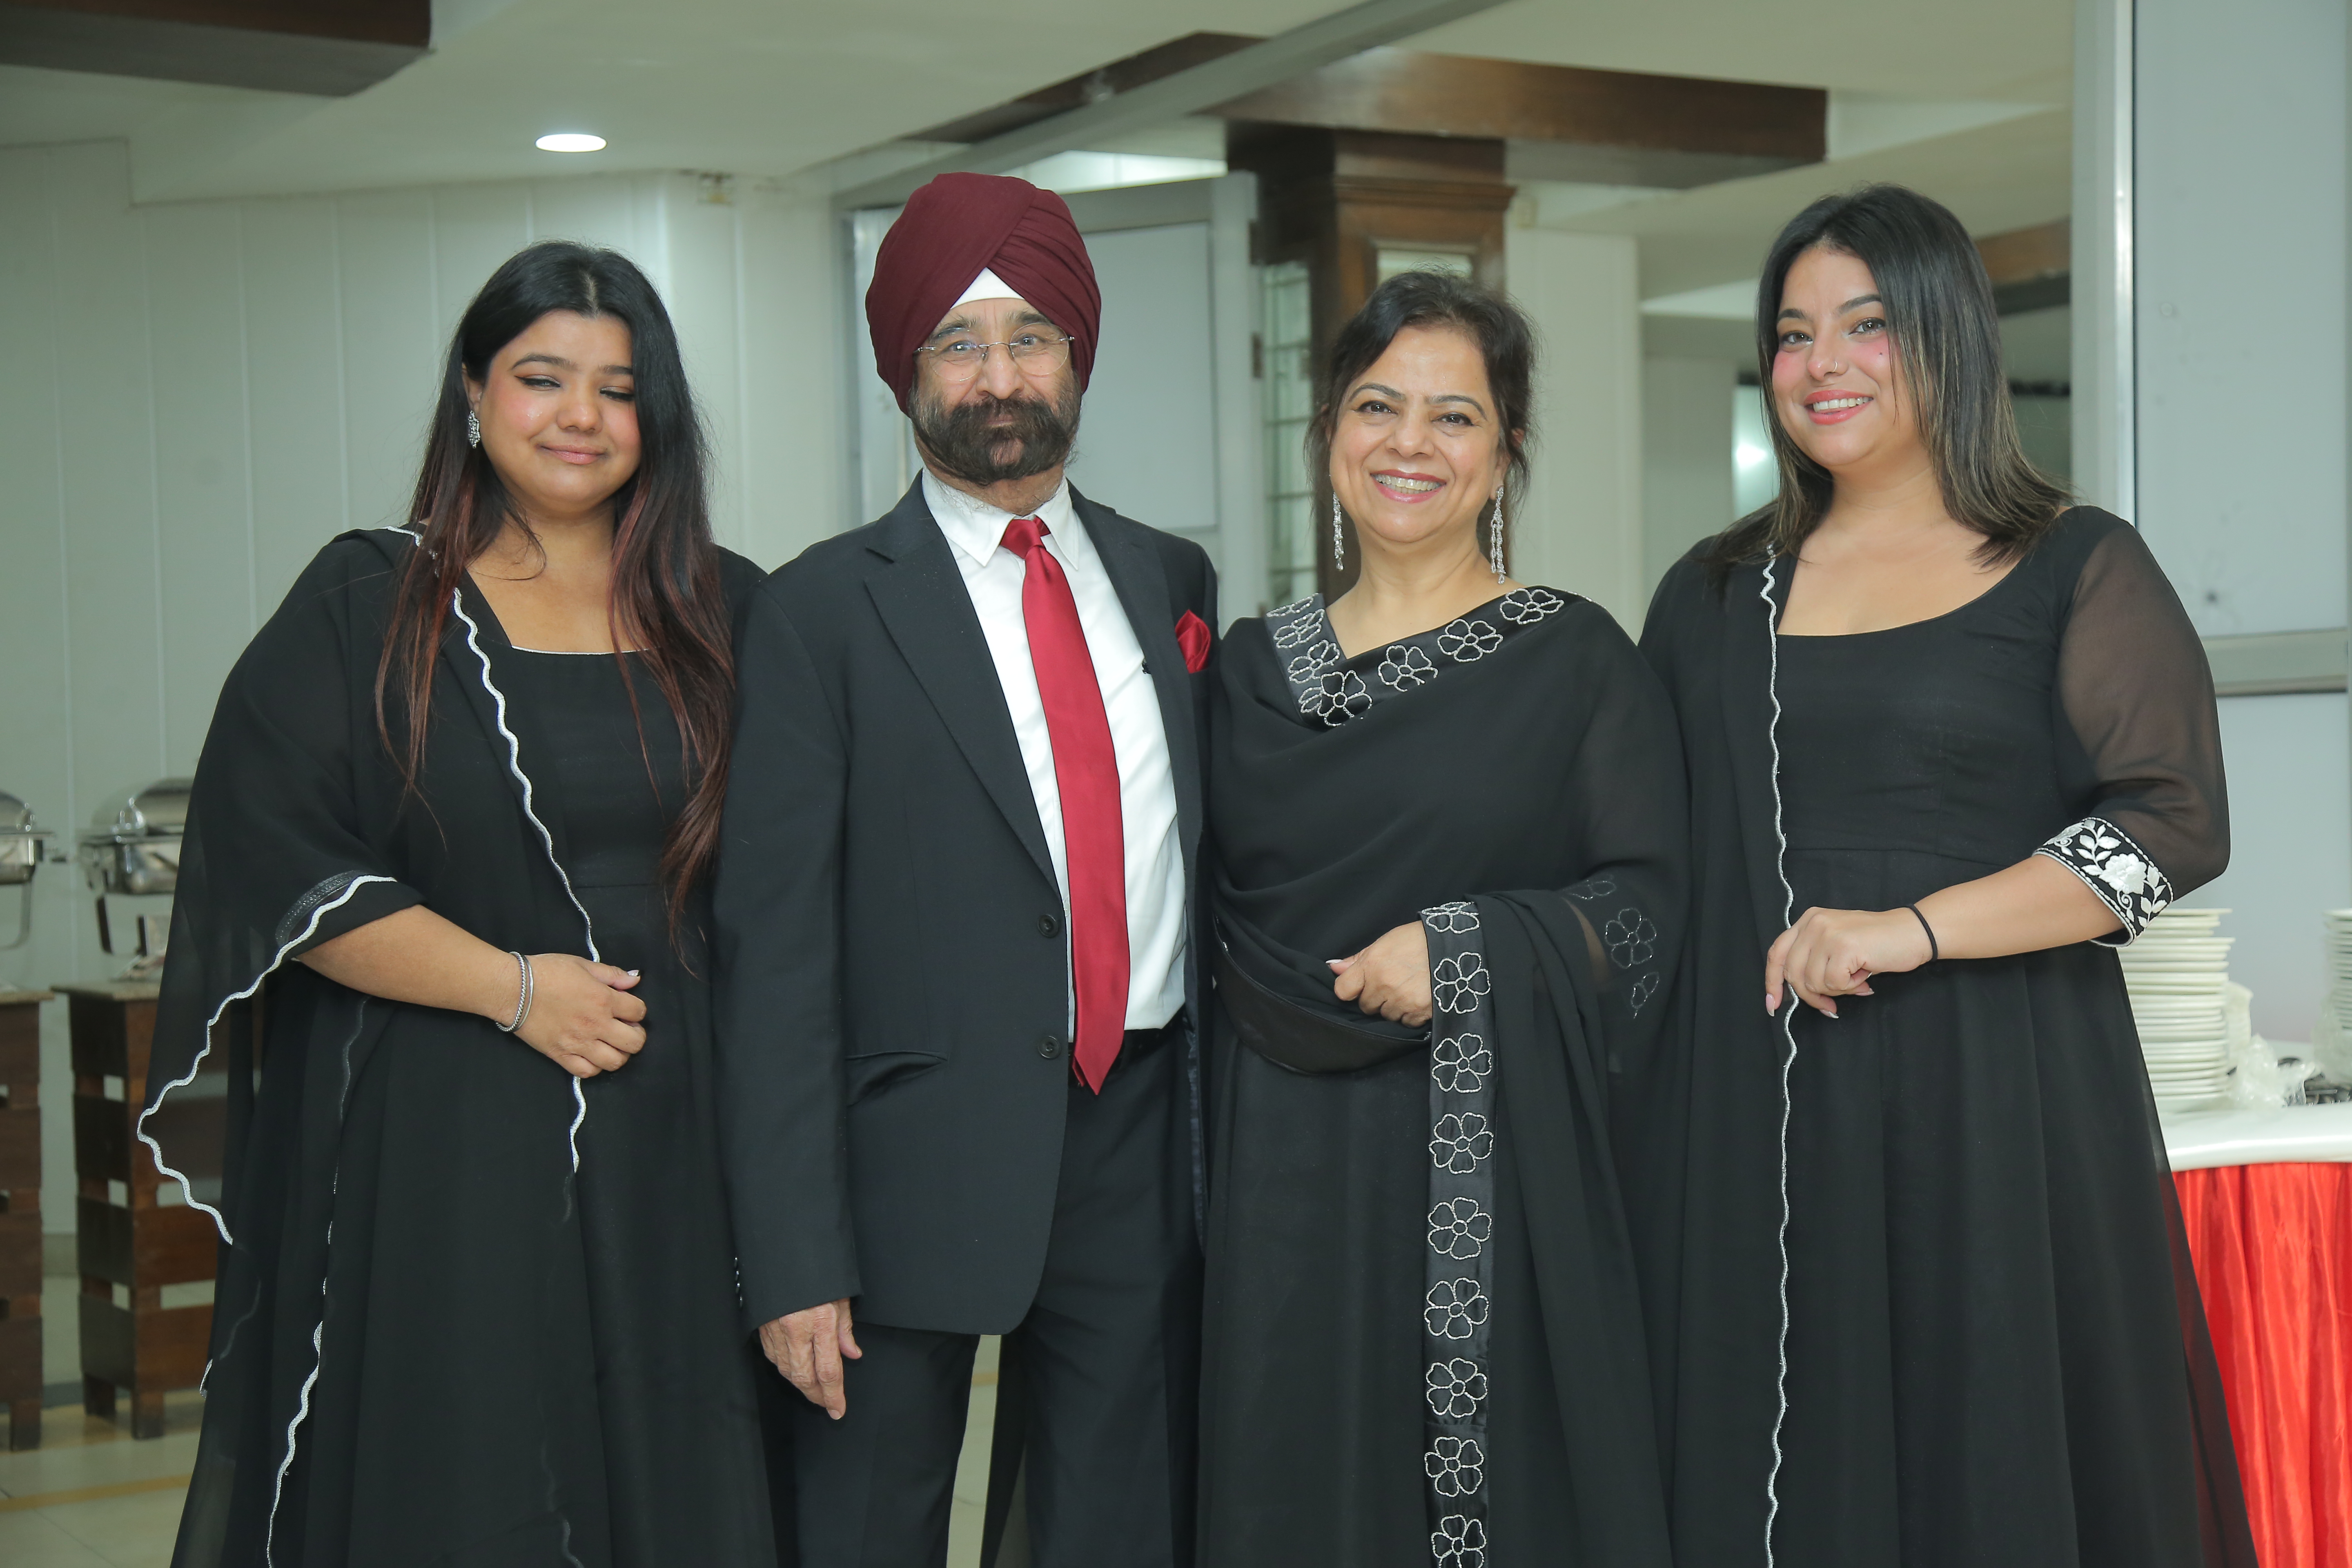 Dr-Manjeet-with-her-hunband-H-S-Panaser-and-daughters-Ajooni-and-Alicia-Kaur.jpg